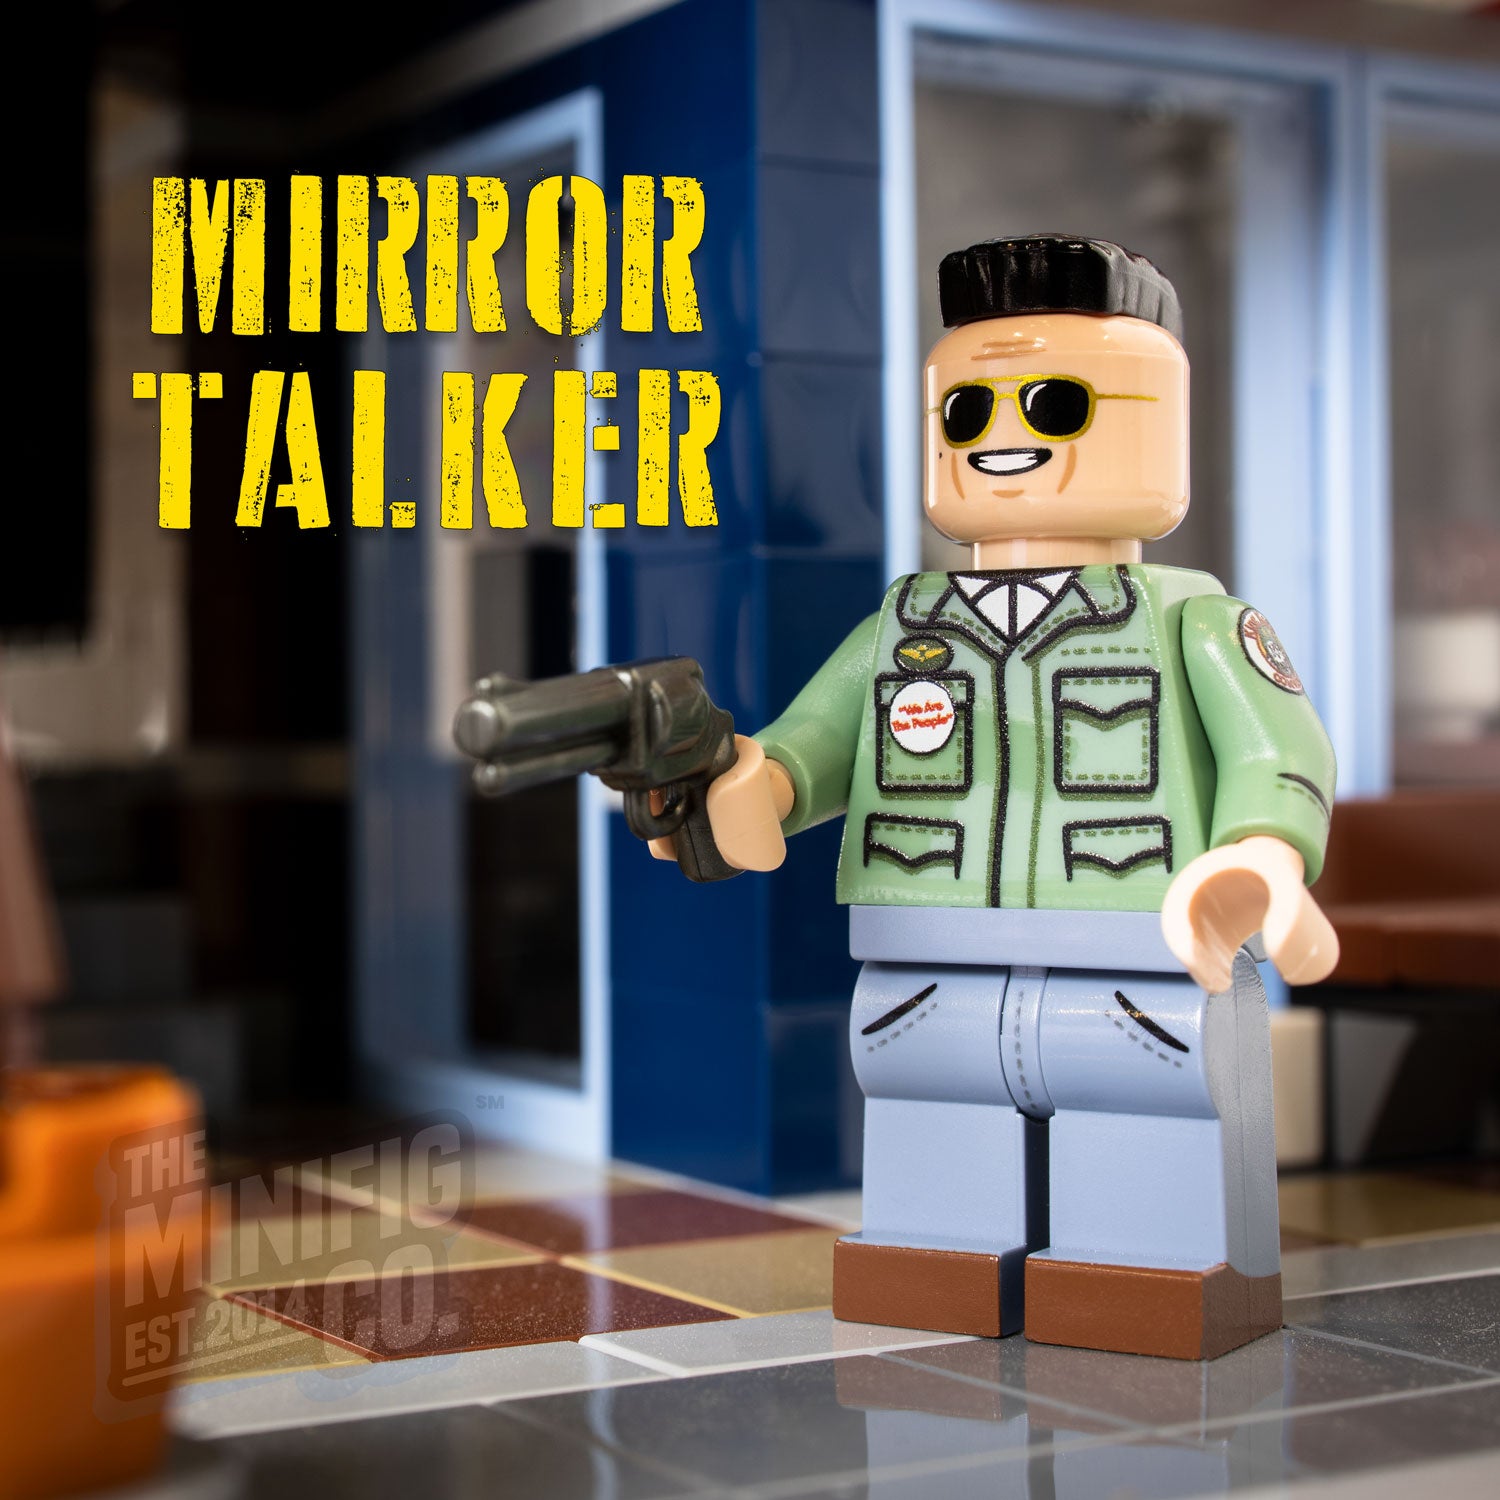 Mirror Talker - The Minifig Co.